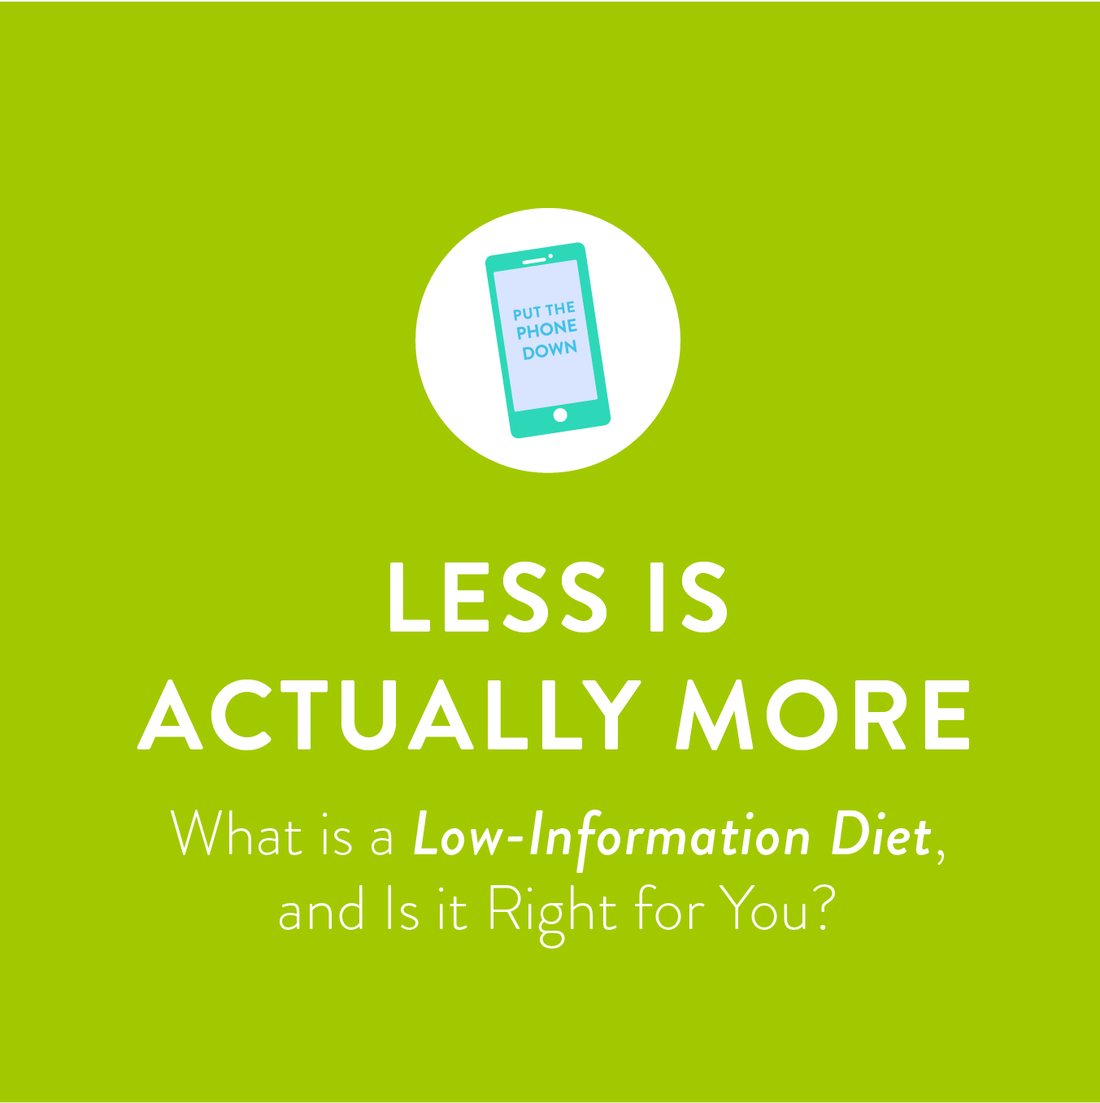 Less is Actually More: What is a Low-Information Diet, and Is it Right for You?